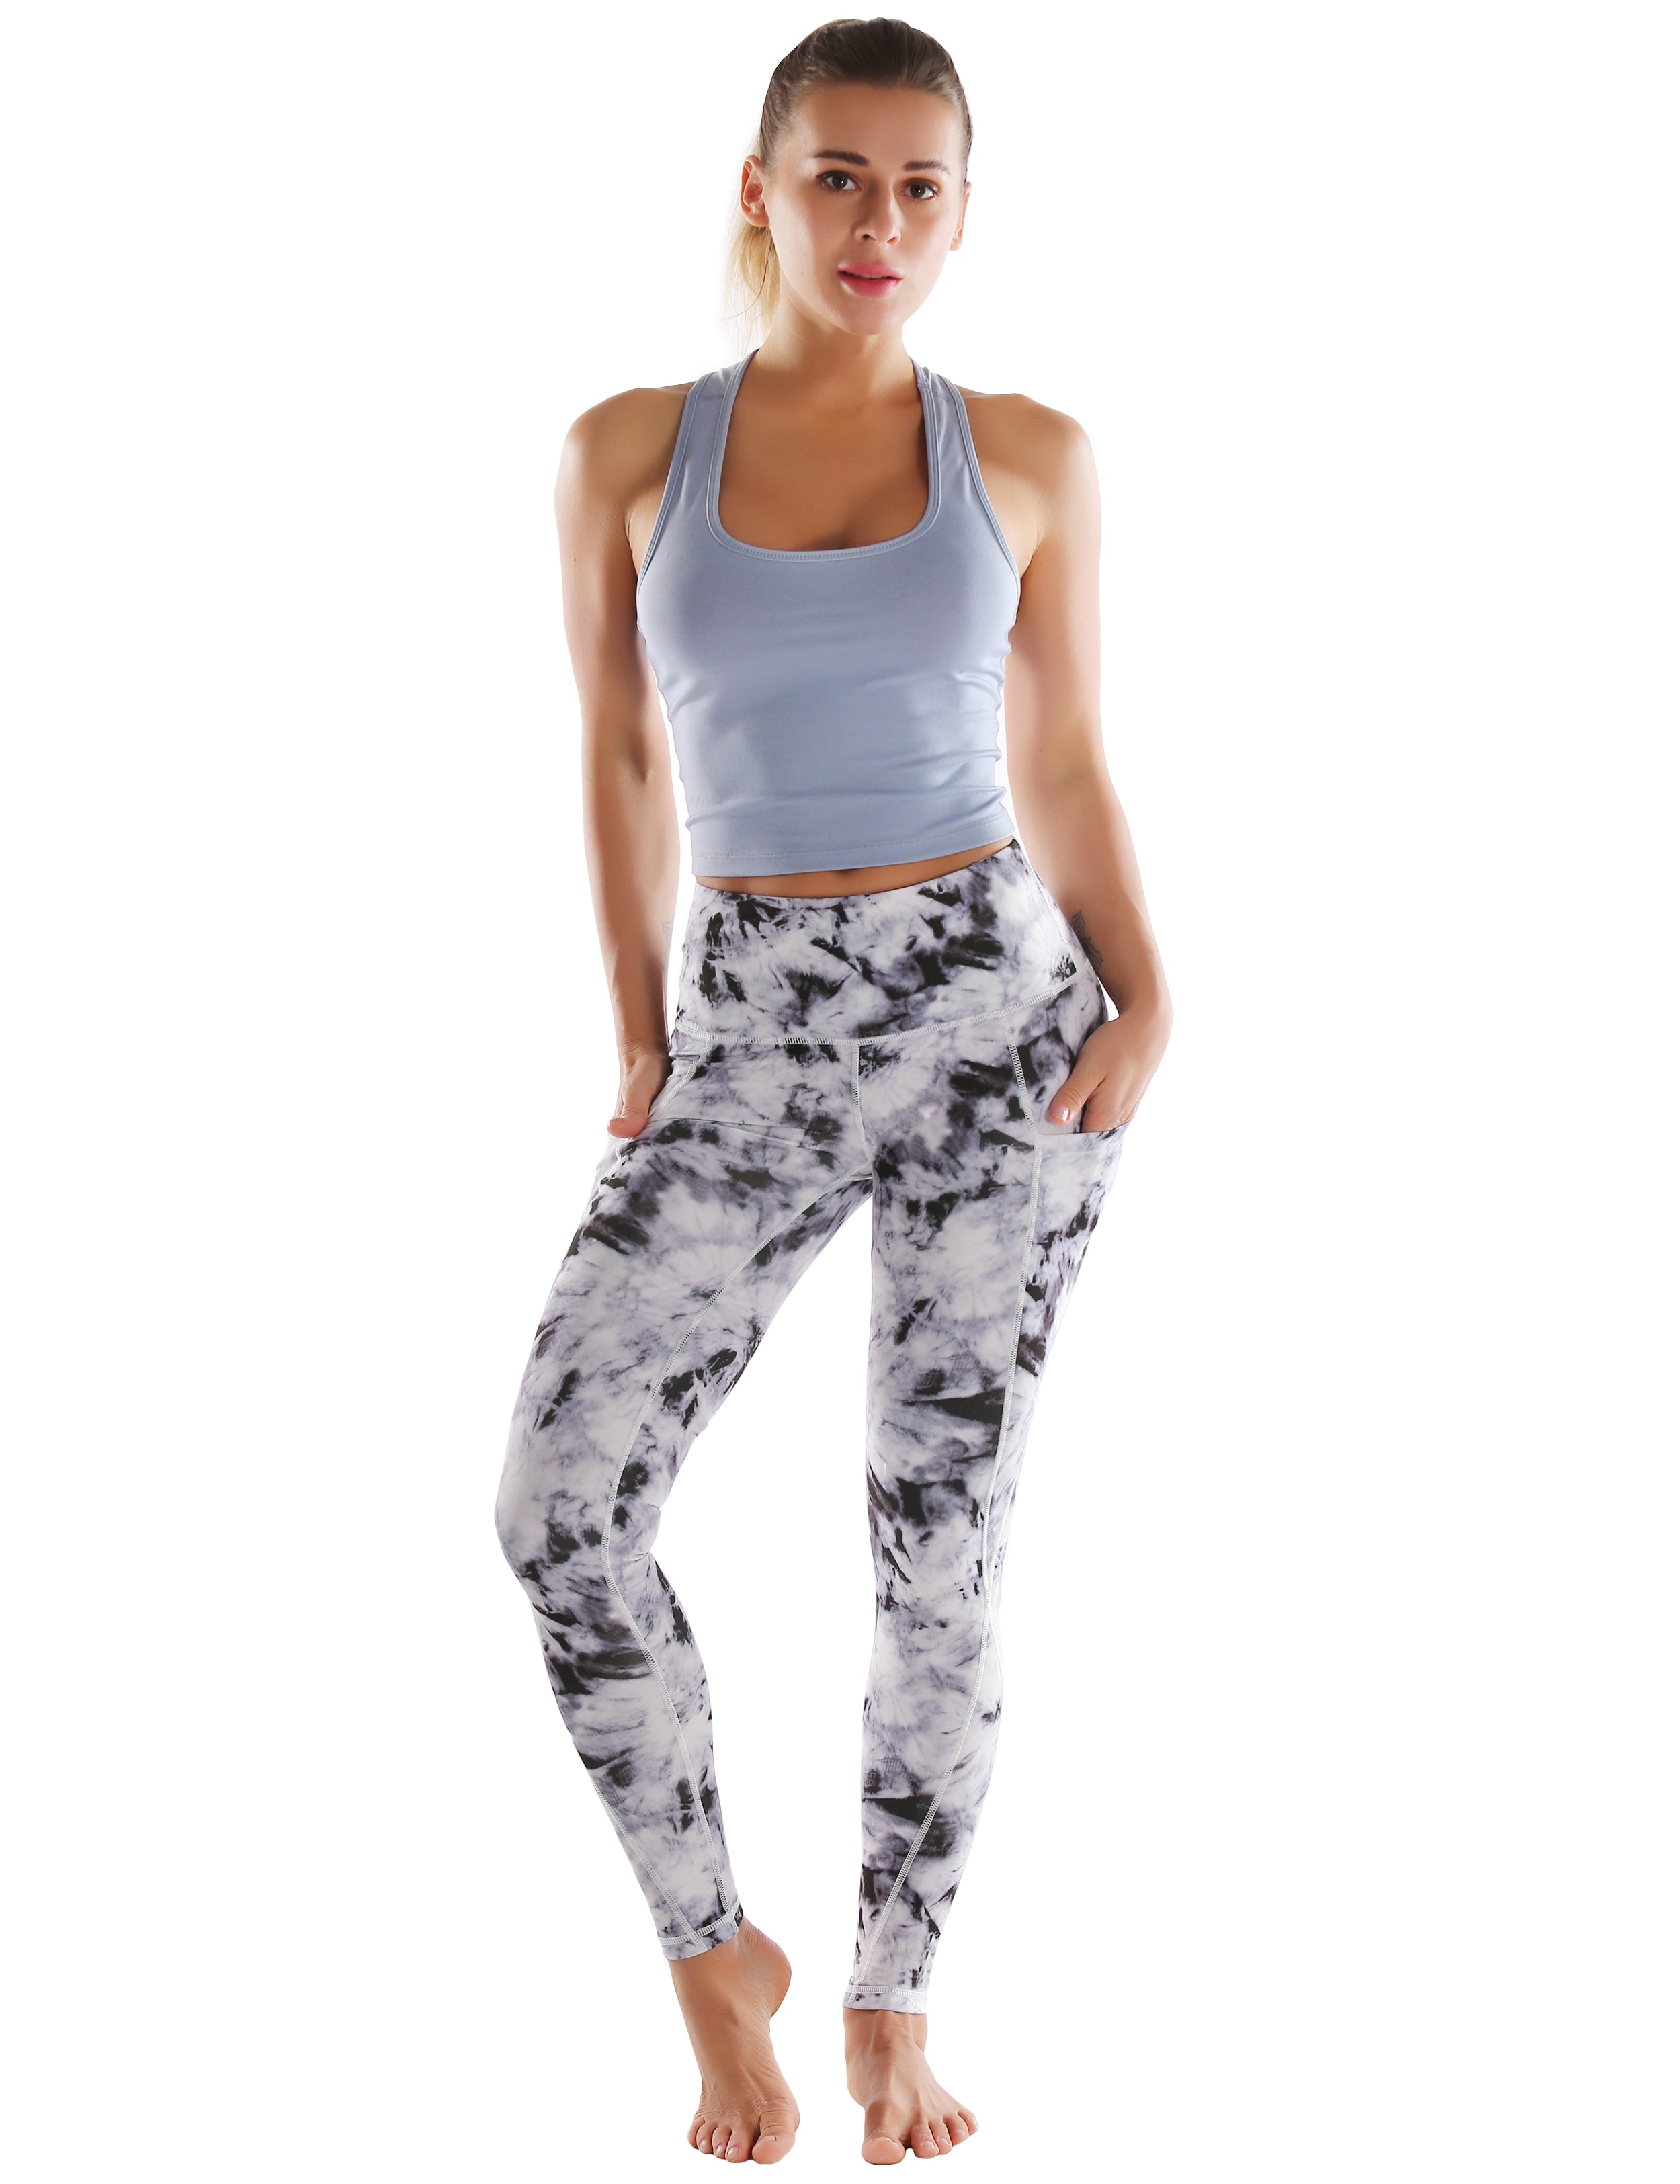 High Waist Side Pockets Yoga Pants blackdandelion 78%Polyester/22%Spandex Fabric doesn't attract lint easily 4-way stretch No see-through Moisture-wicking Tummy control Inner pocket